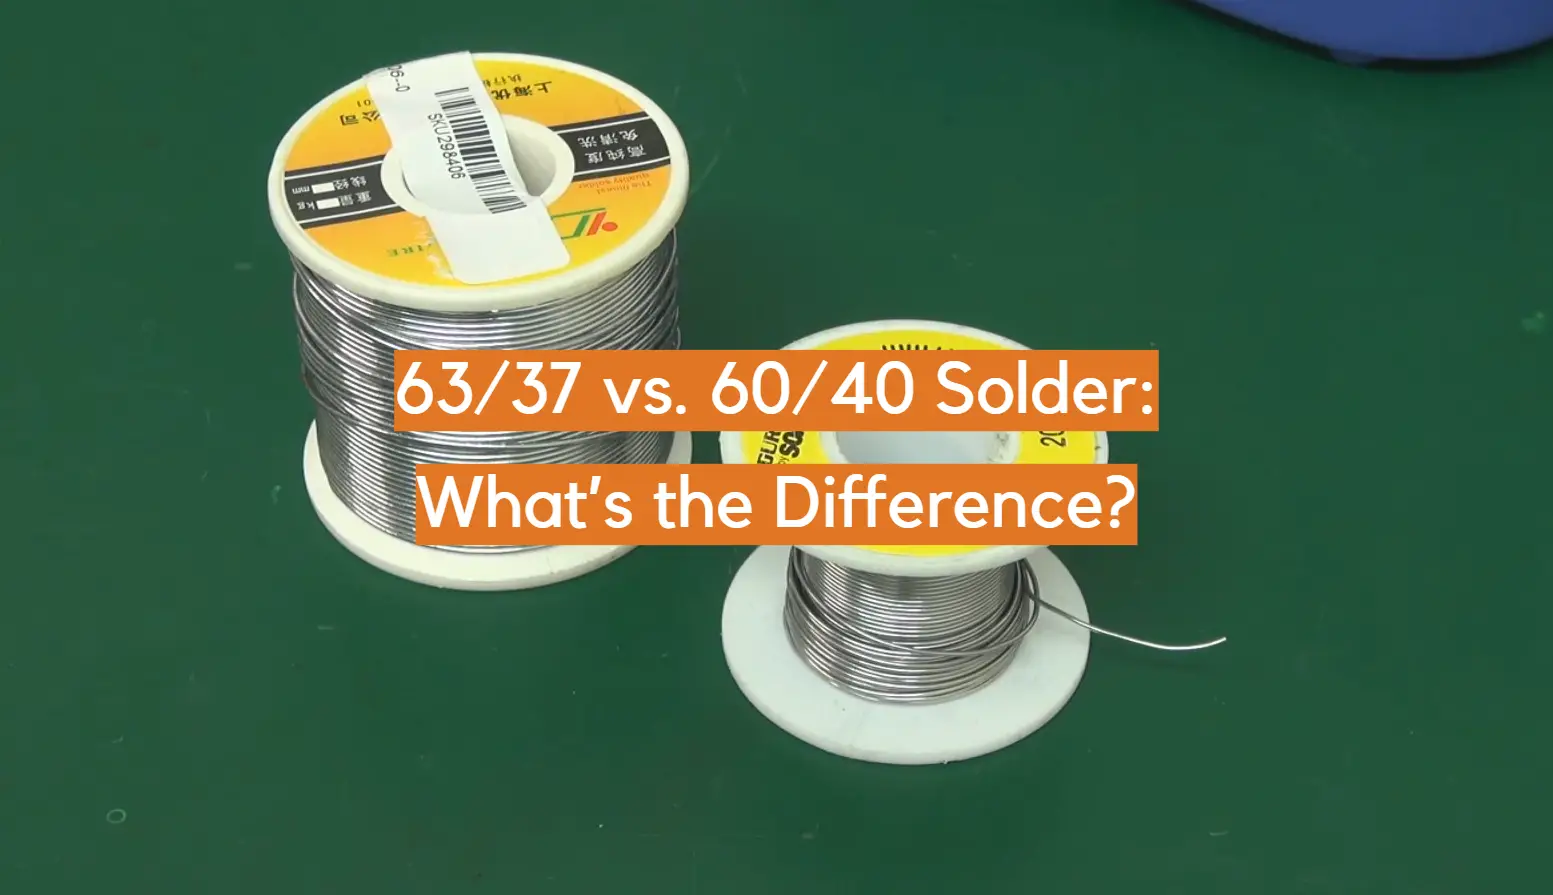 63/37 vs. 60/40 Solder: What’s the Difference?